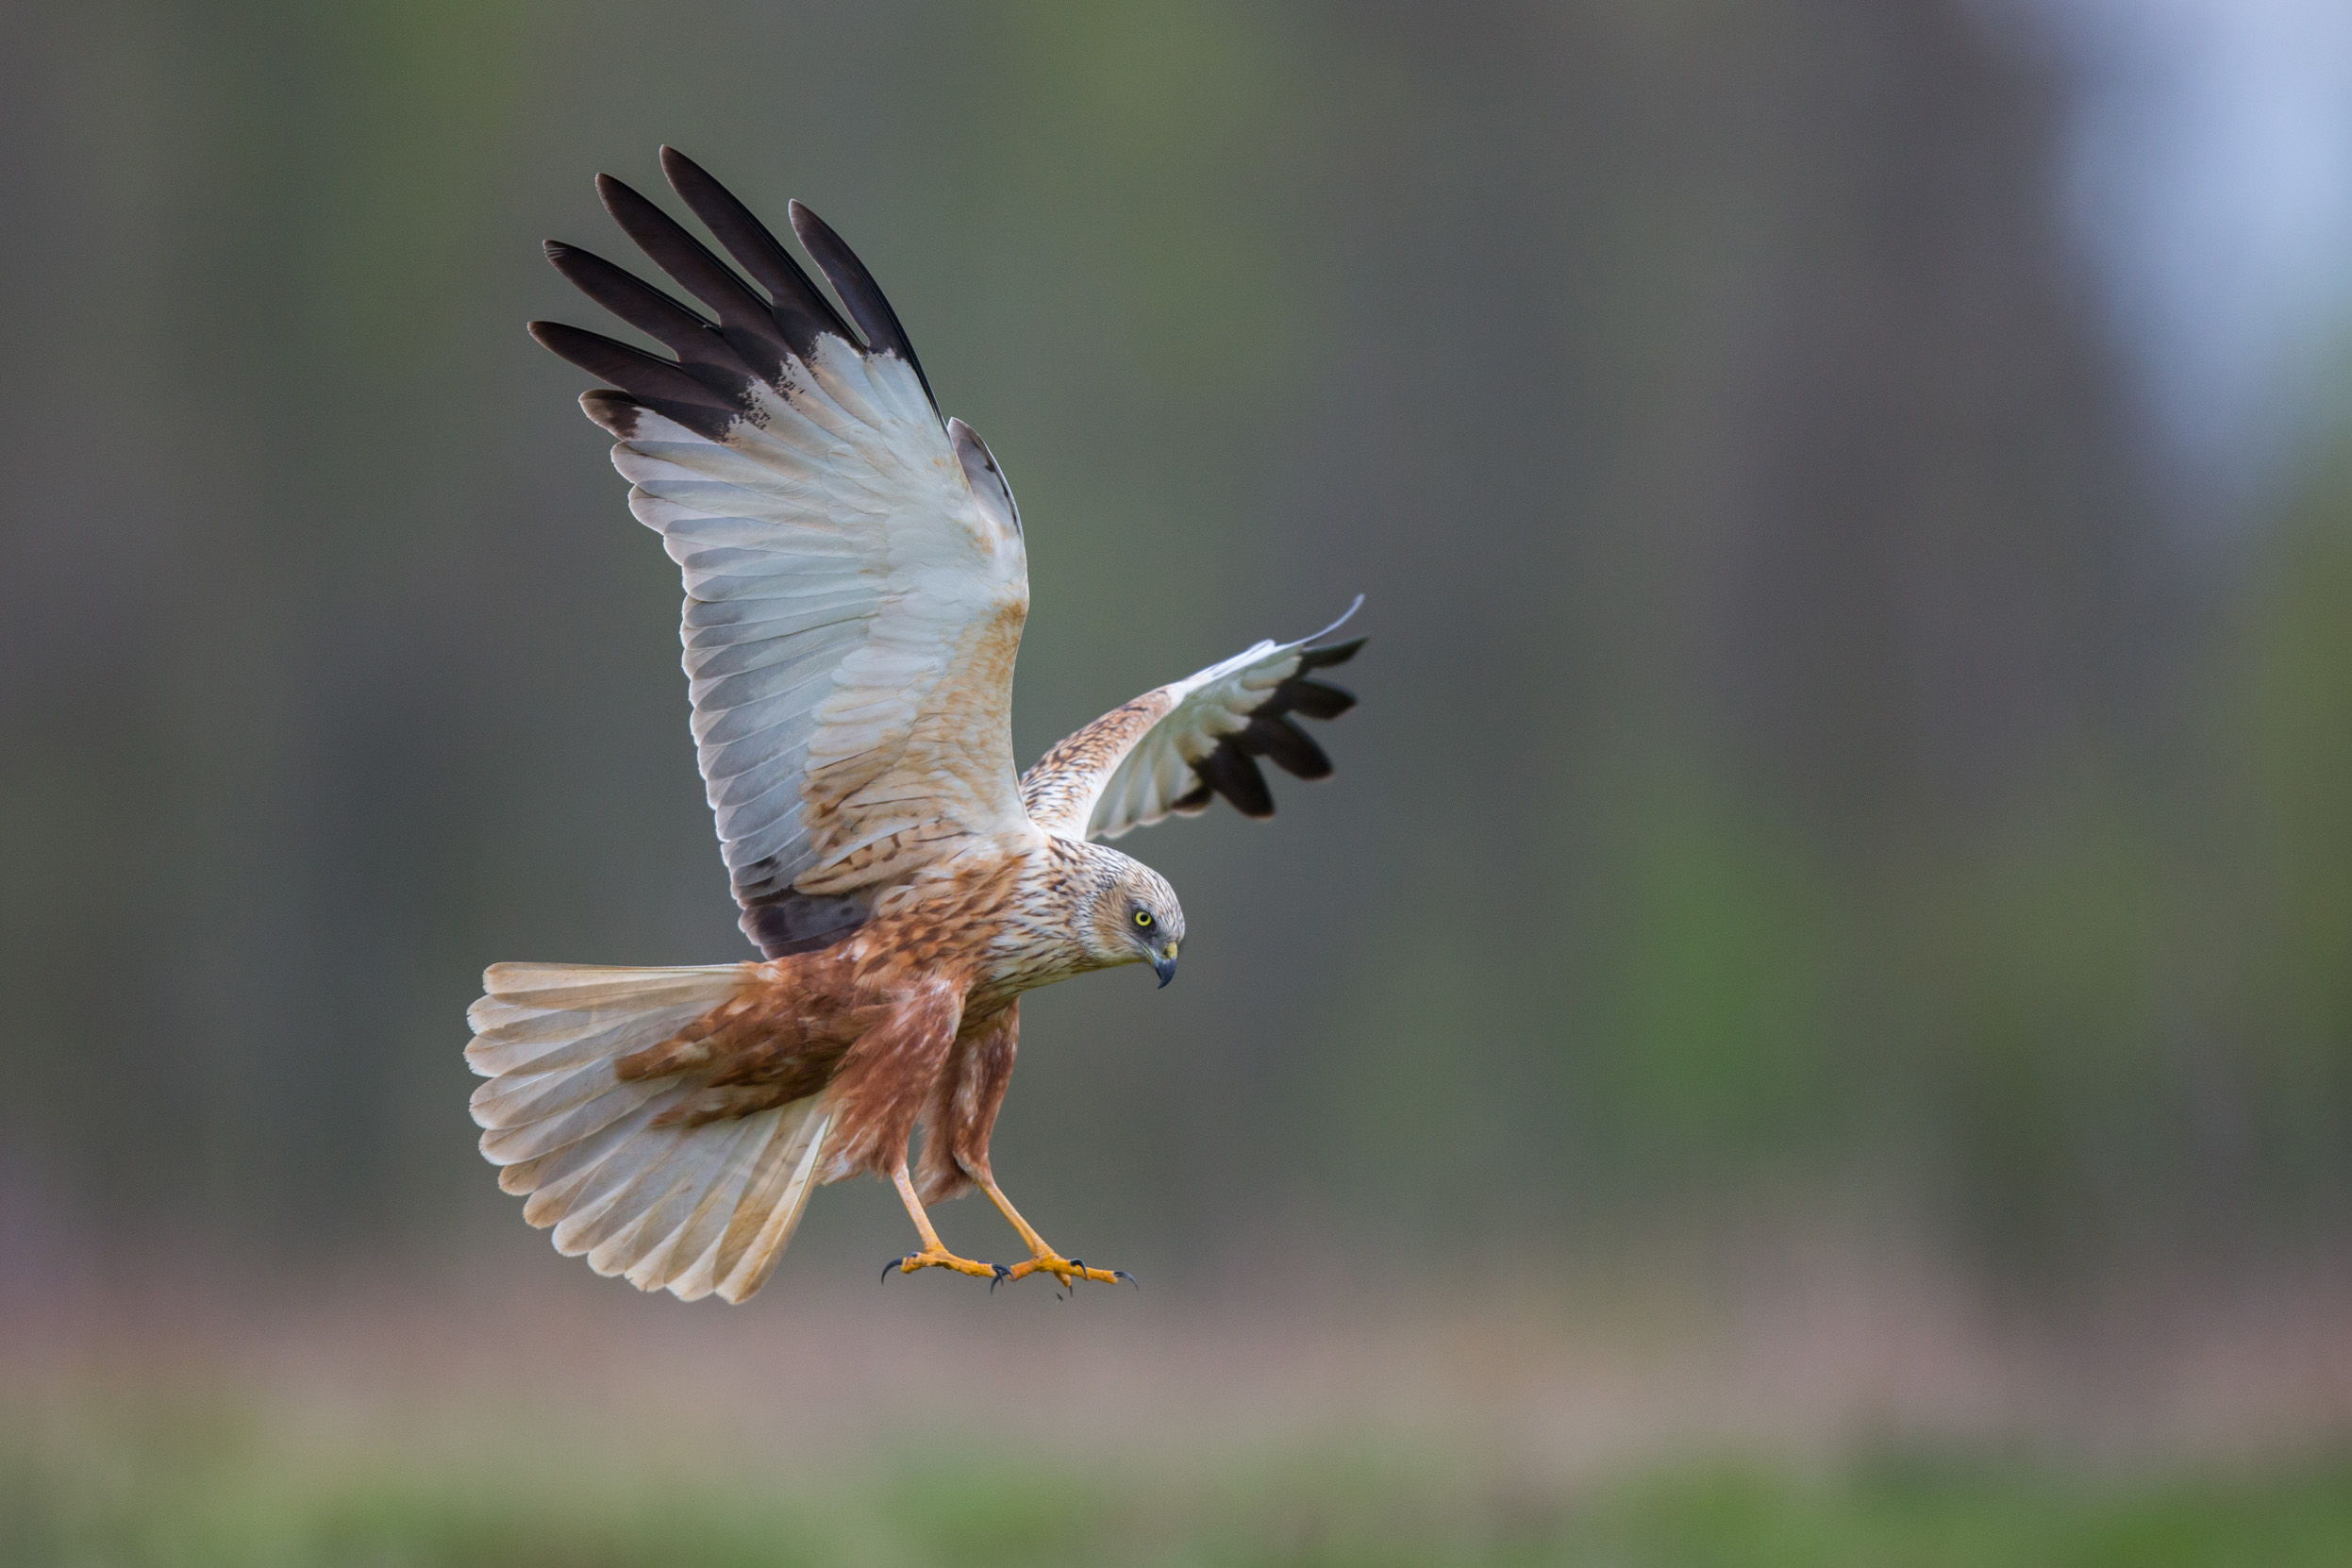 A male Marsh Harrier about to land on grass.